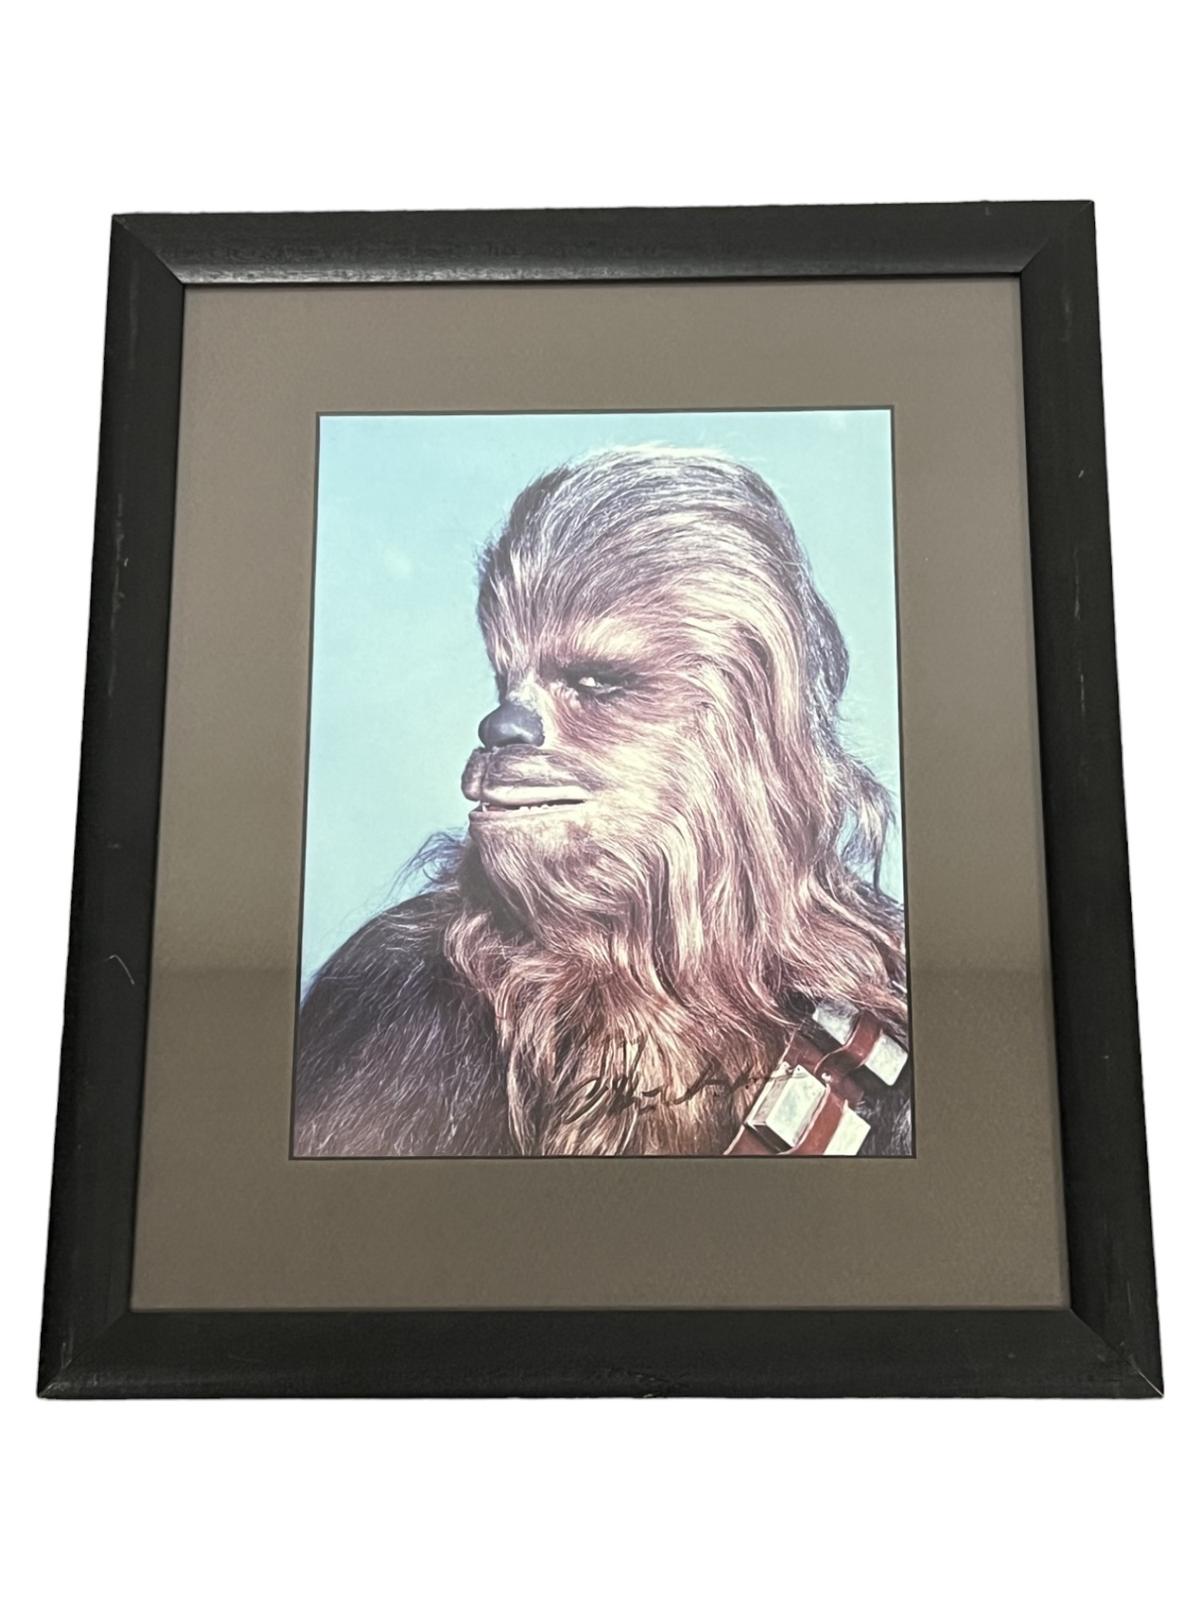 PETER MAYHEW CHEWBACCA SIGNED/AUTOGRAPHED 8 X 10 LUCAS